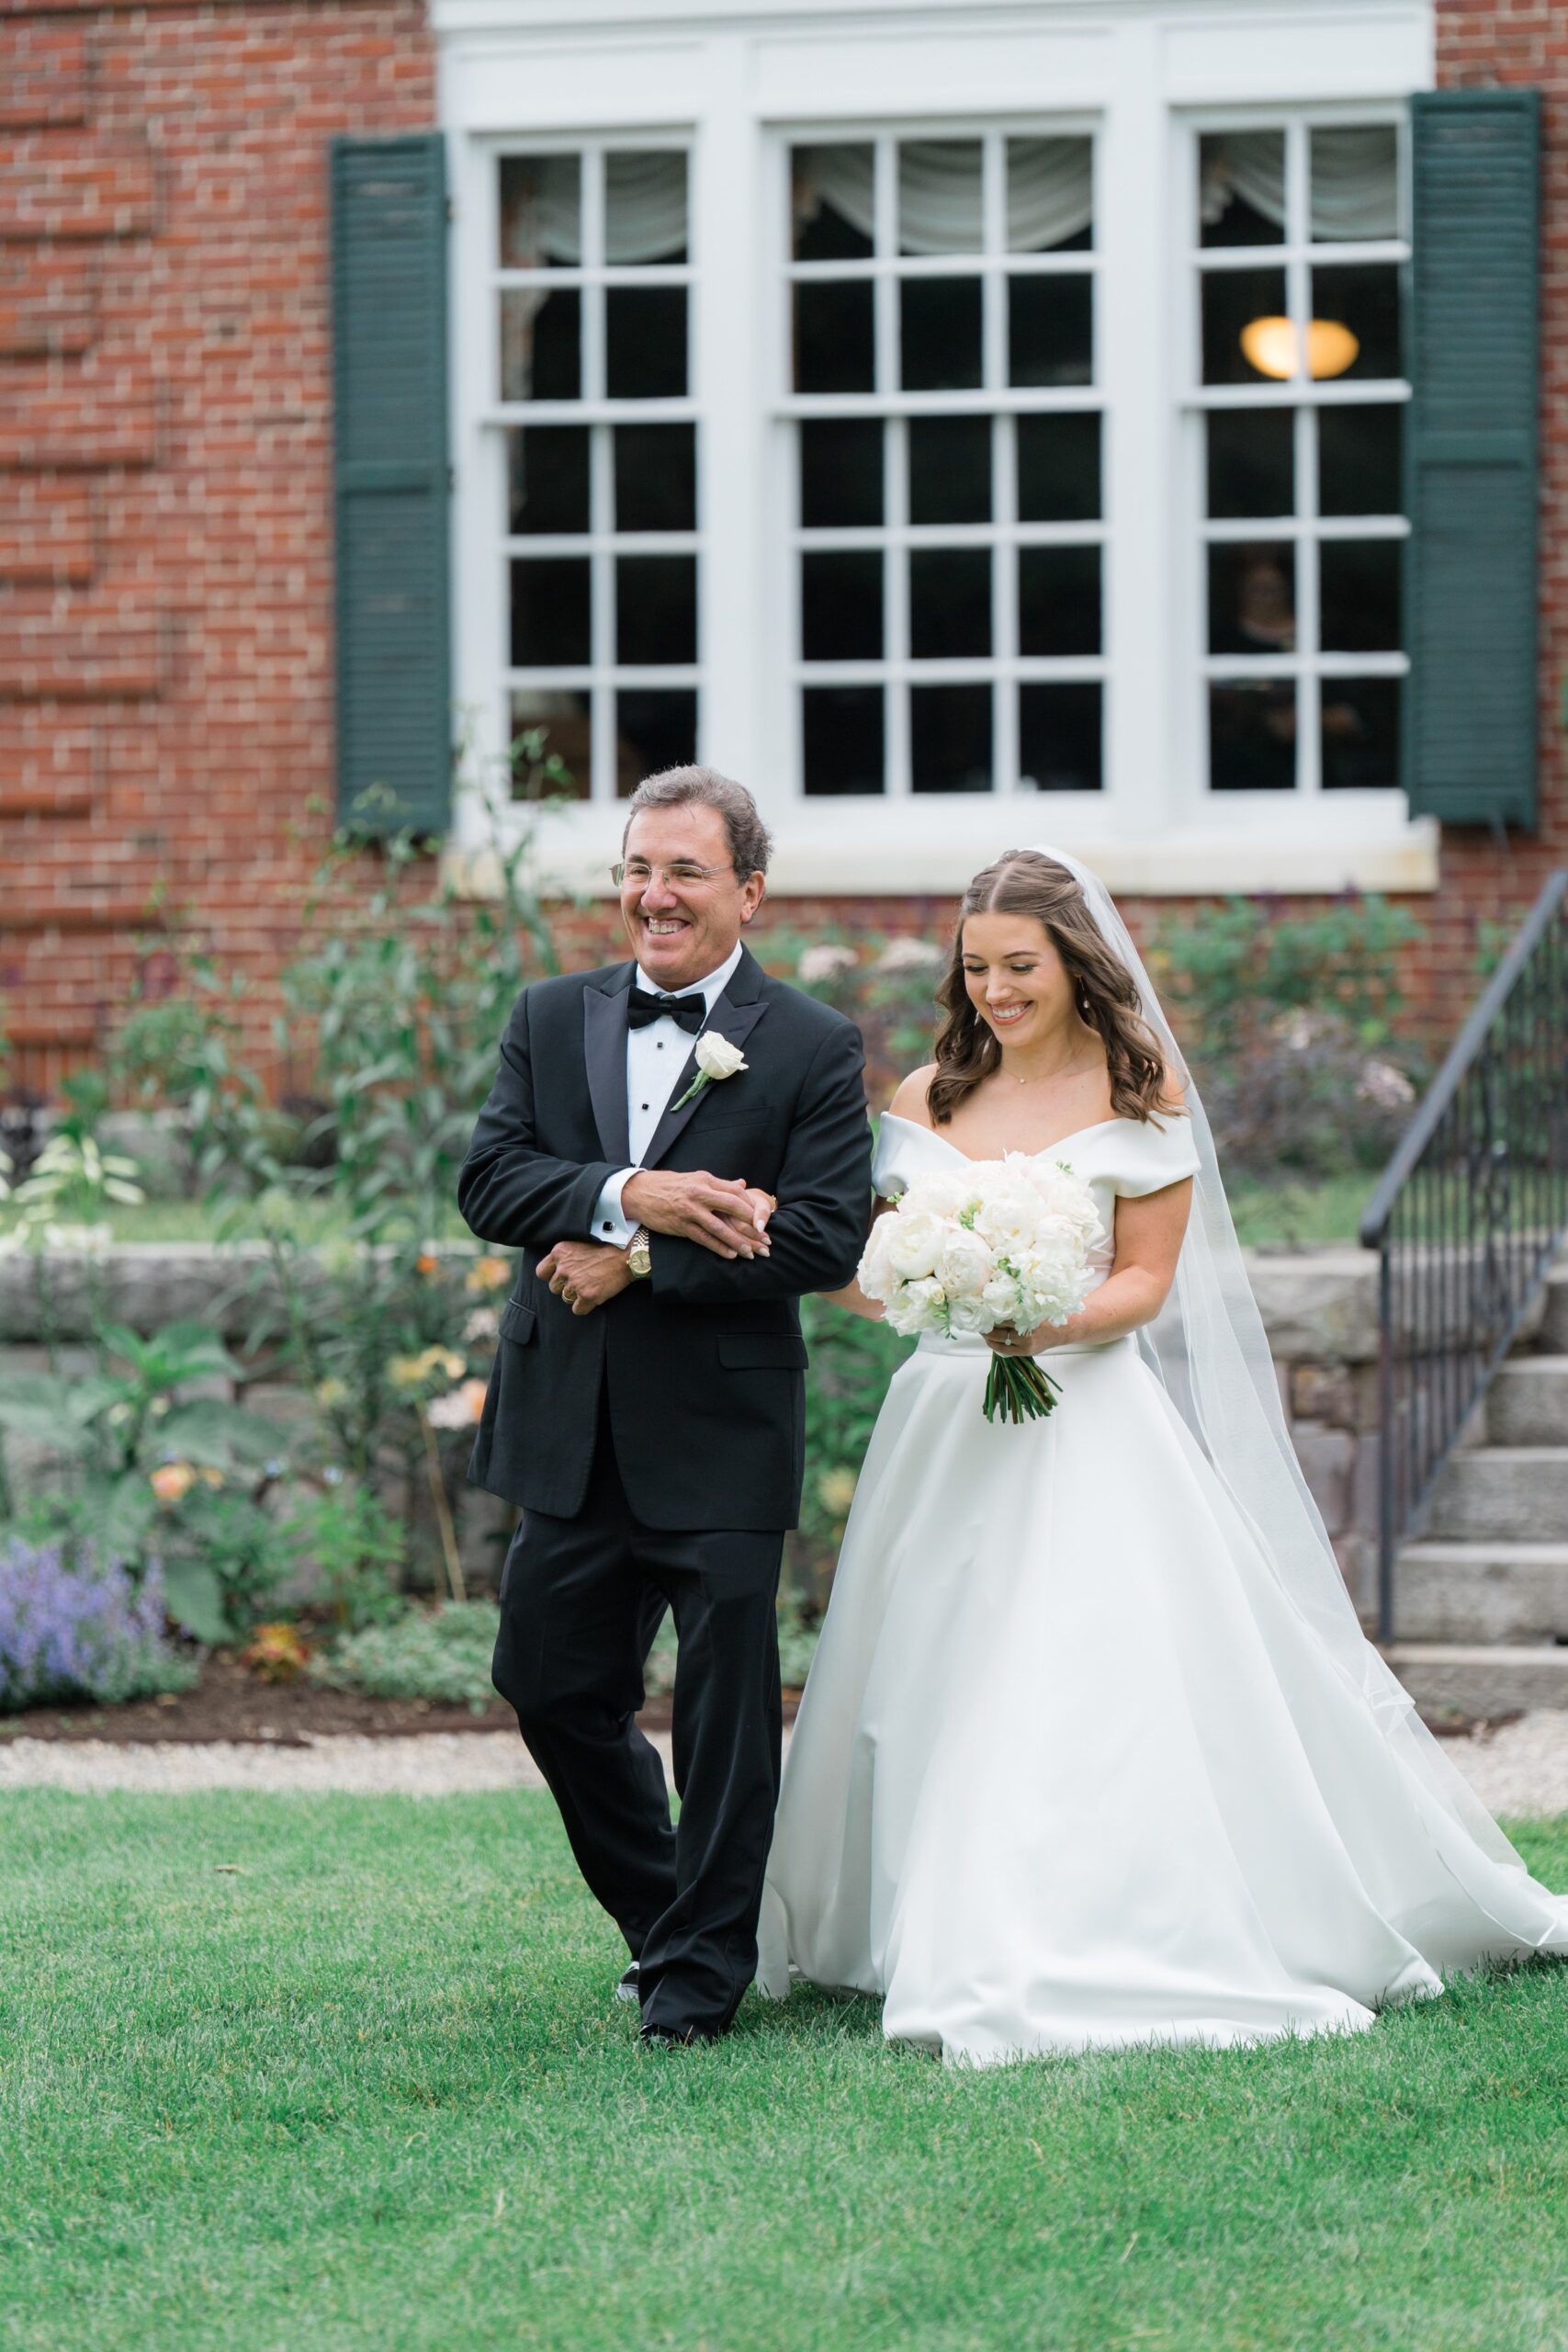 Father of the bride holds his daughters hand as they share a happy moment walking to boston summer wedding ceremony.